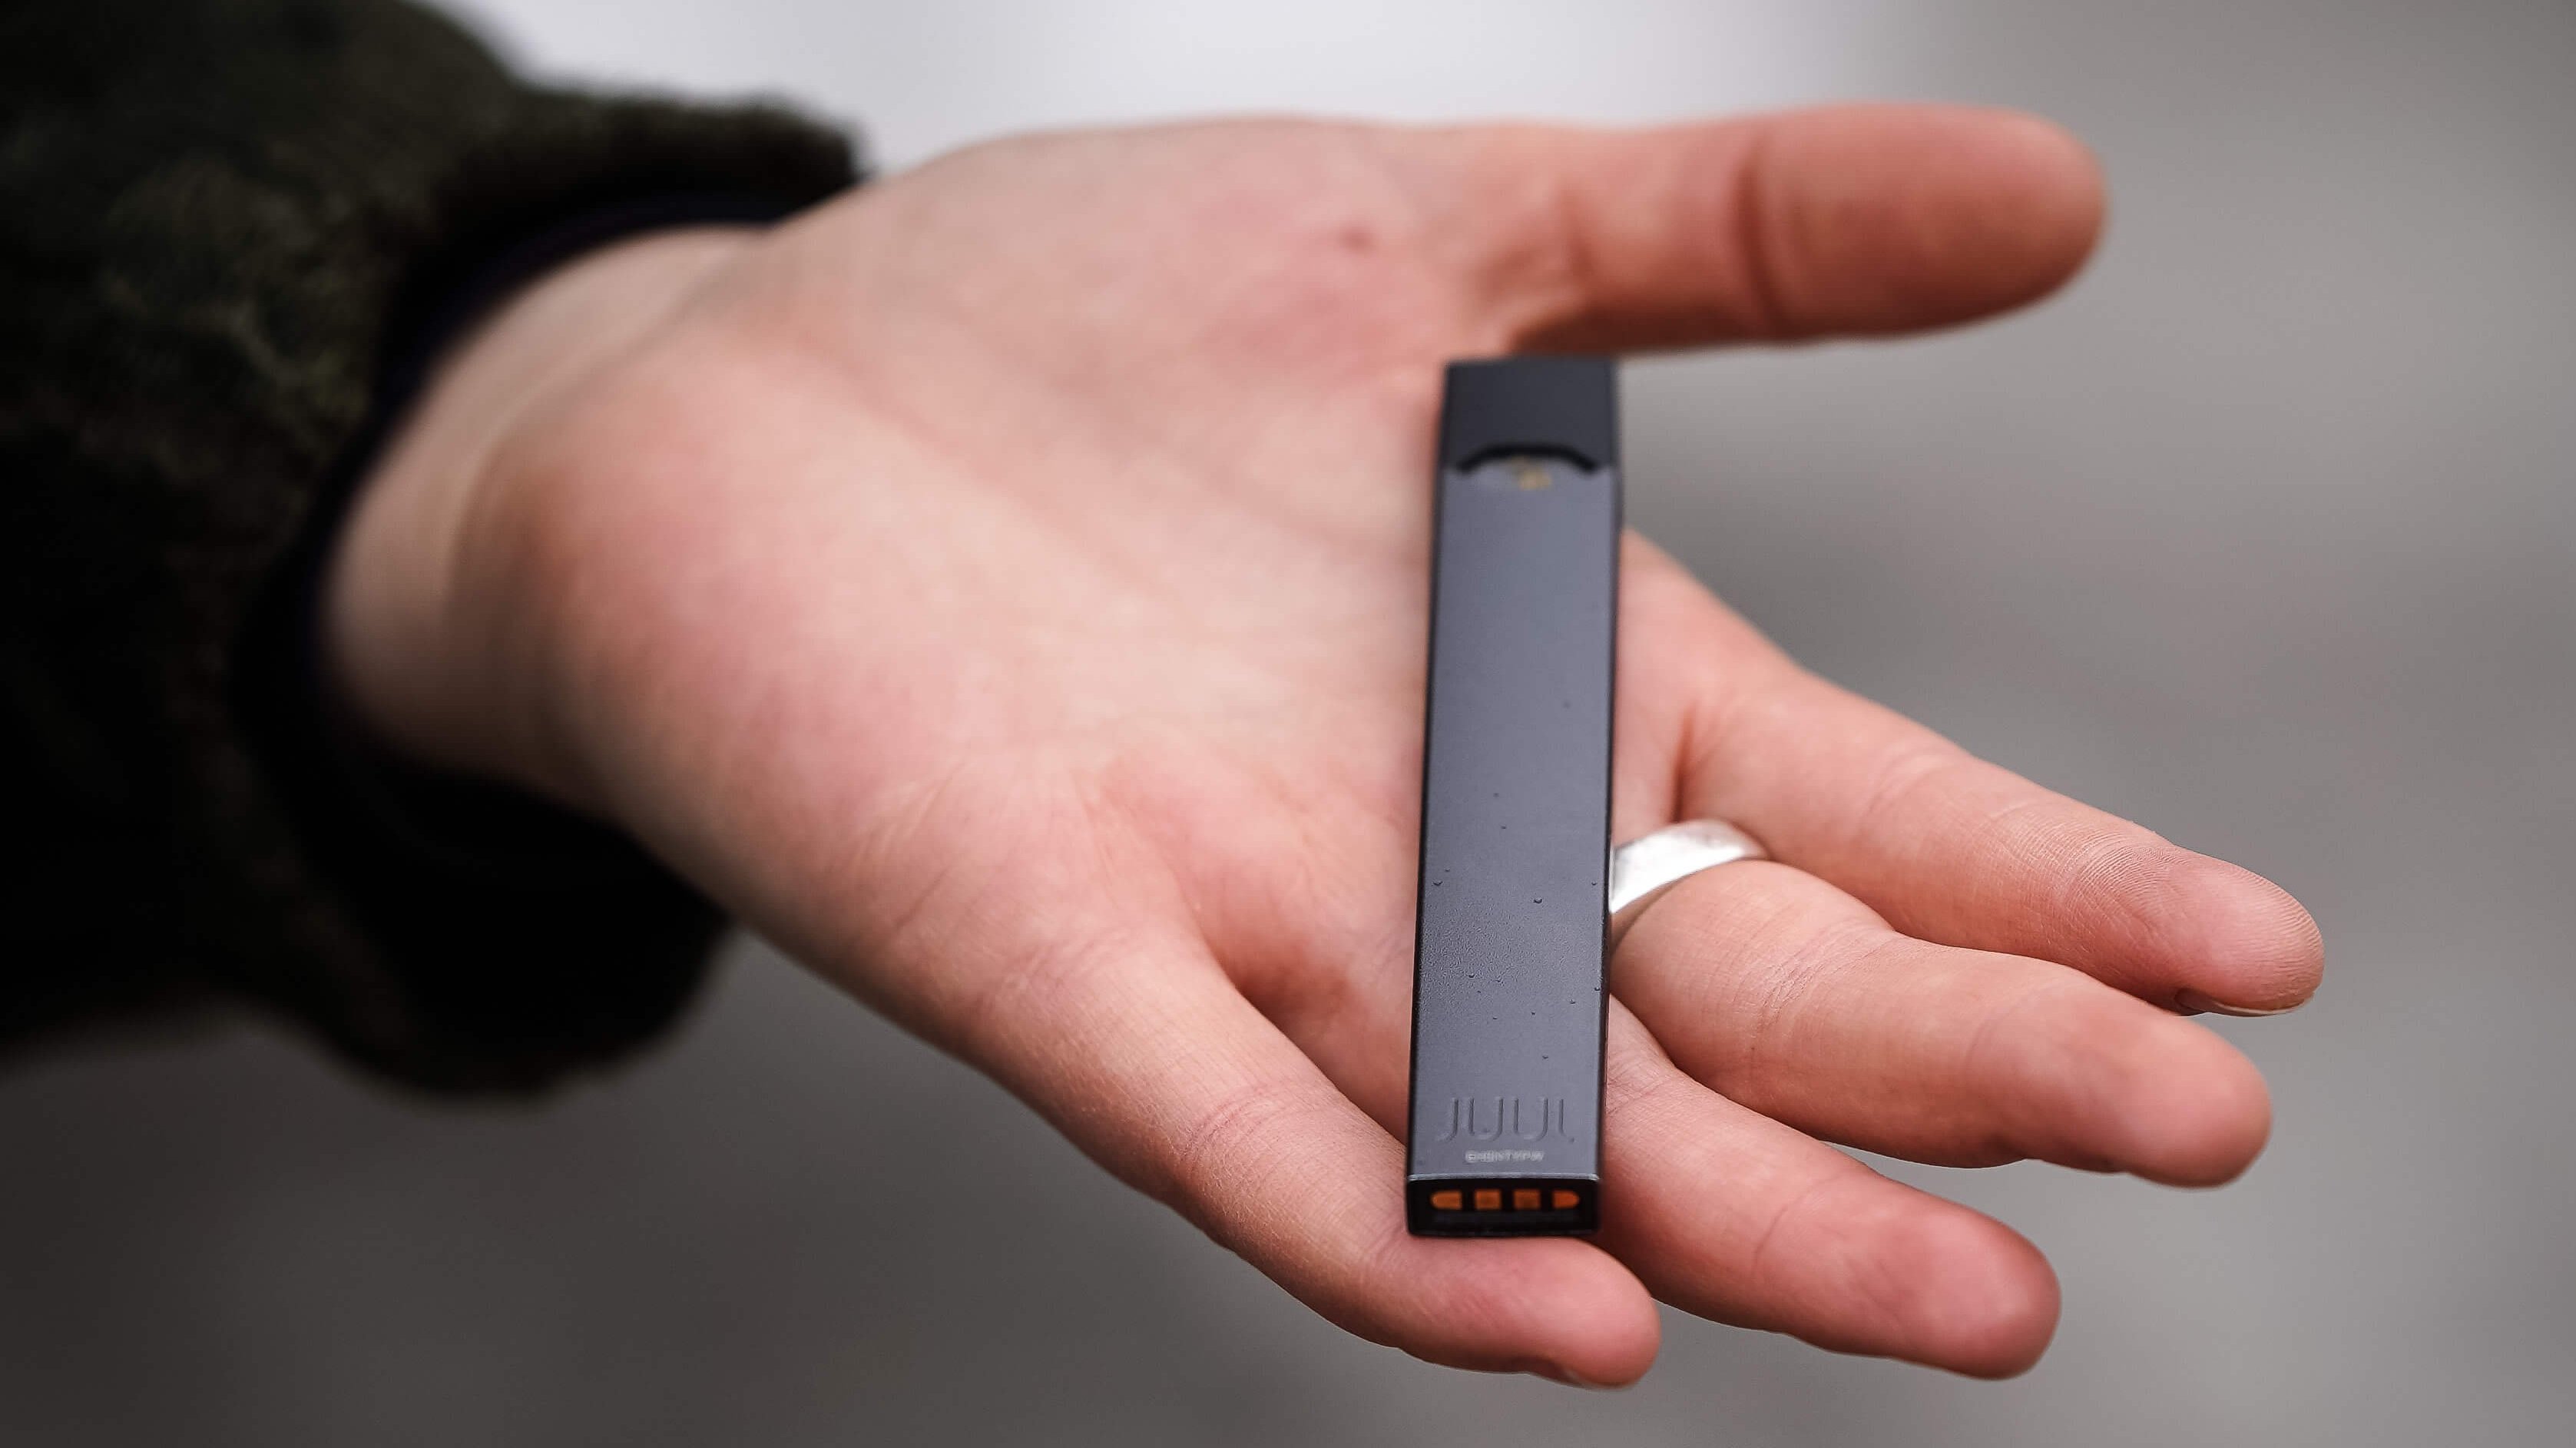 A woman is holding a Juul e-cigarette, in Montreal, vaping